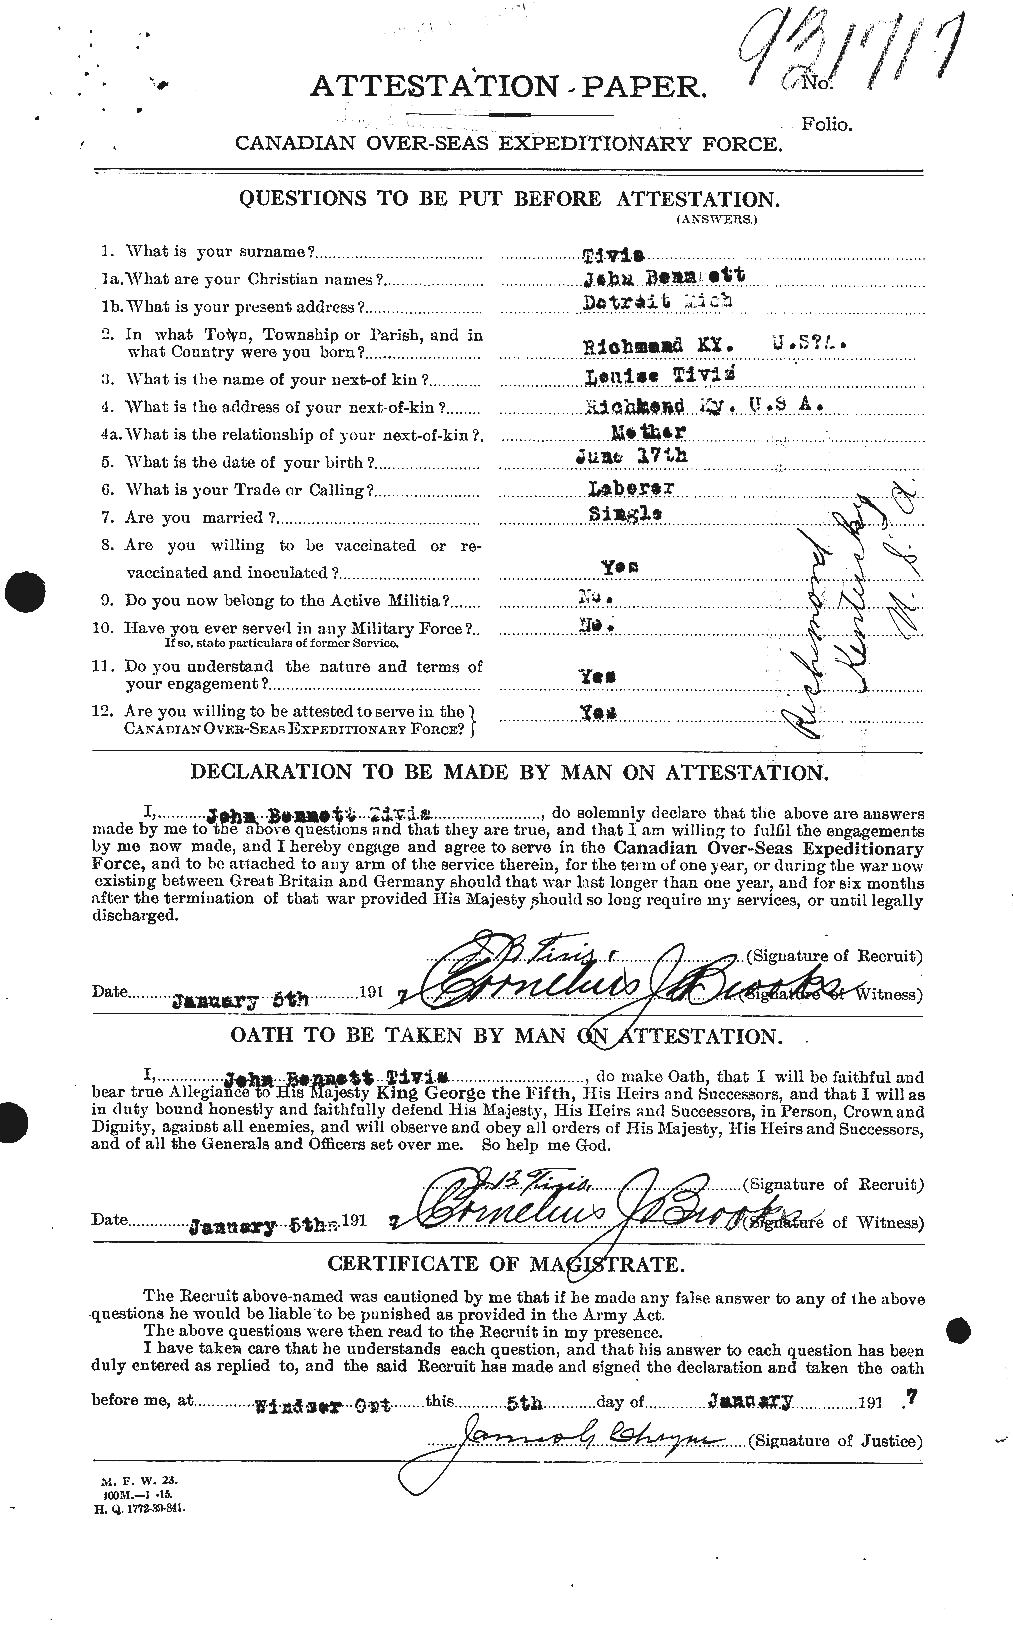 Personnel Records of the First World War - CEF 634995a